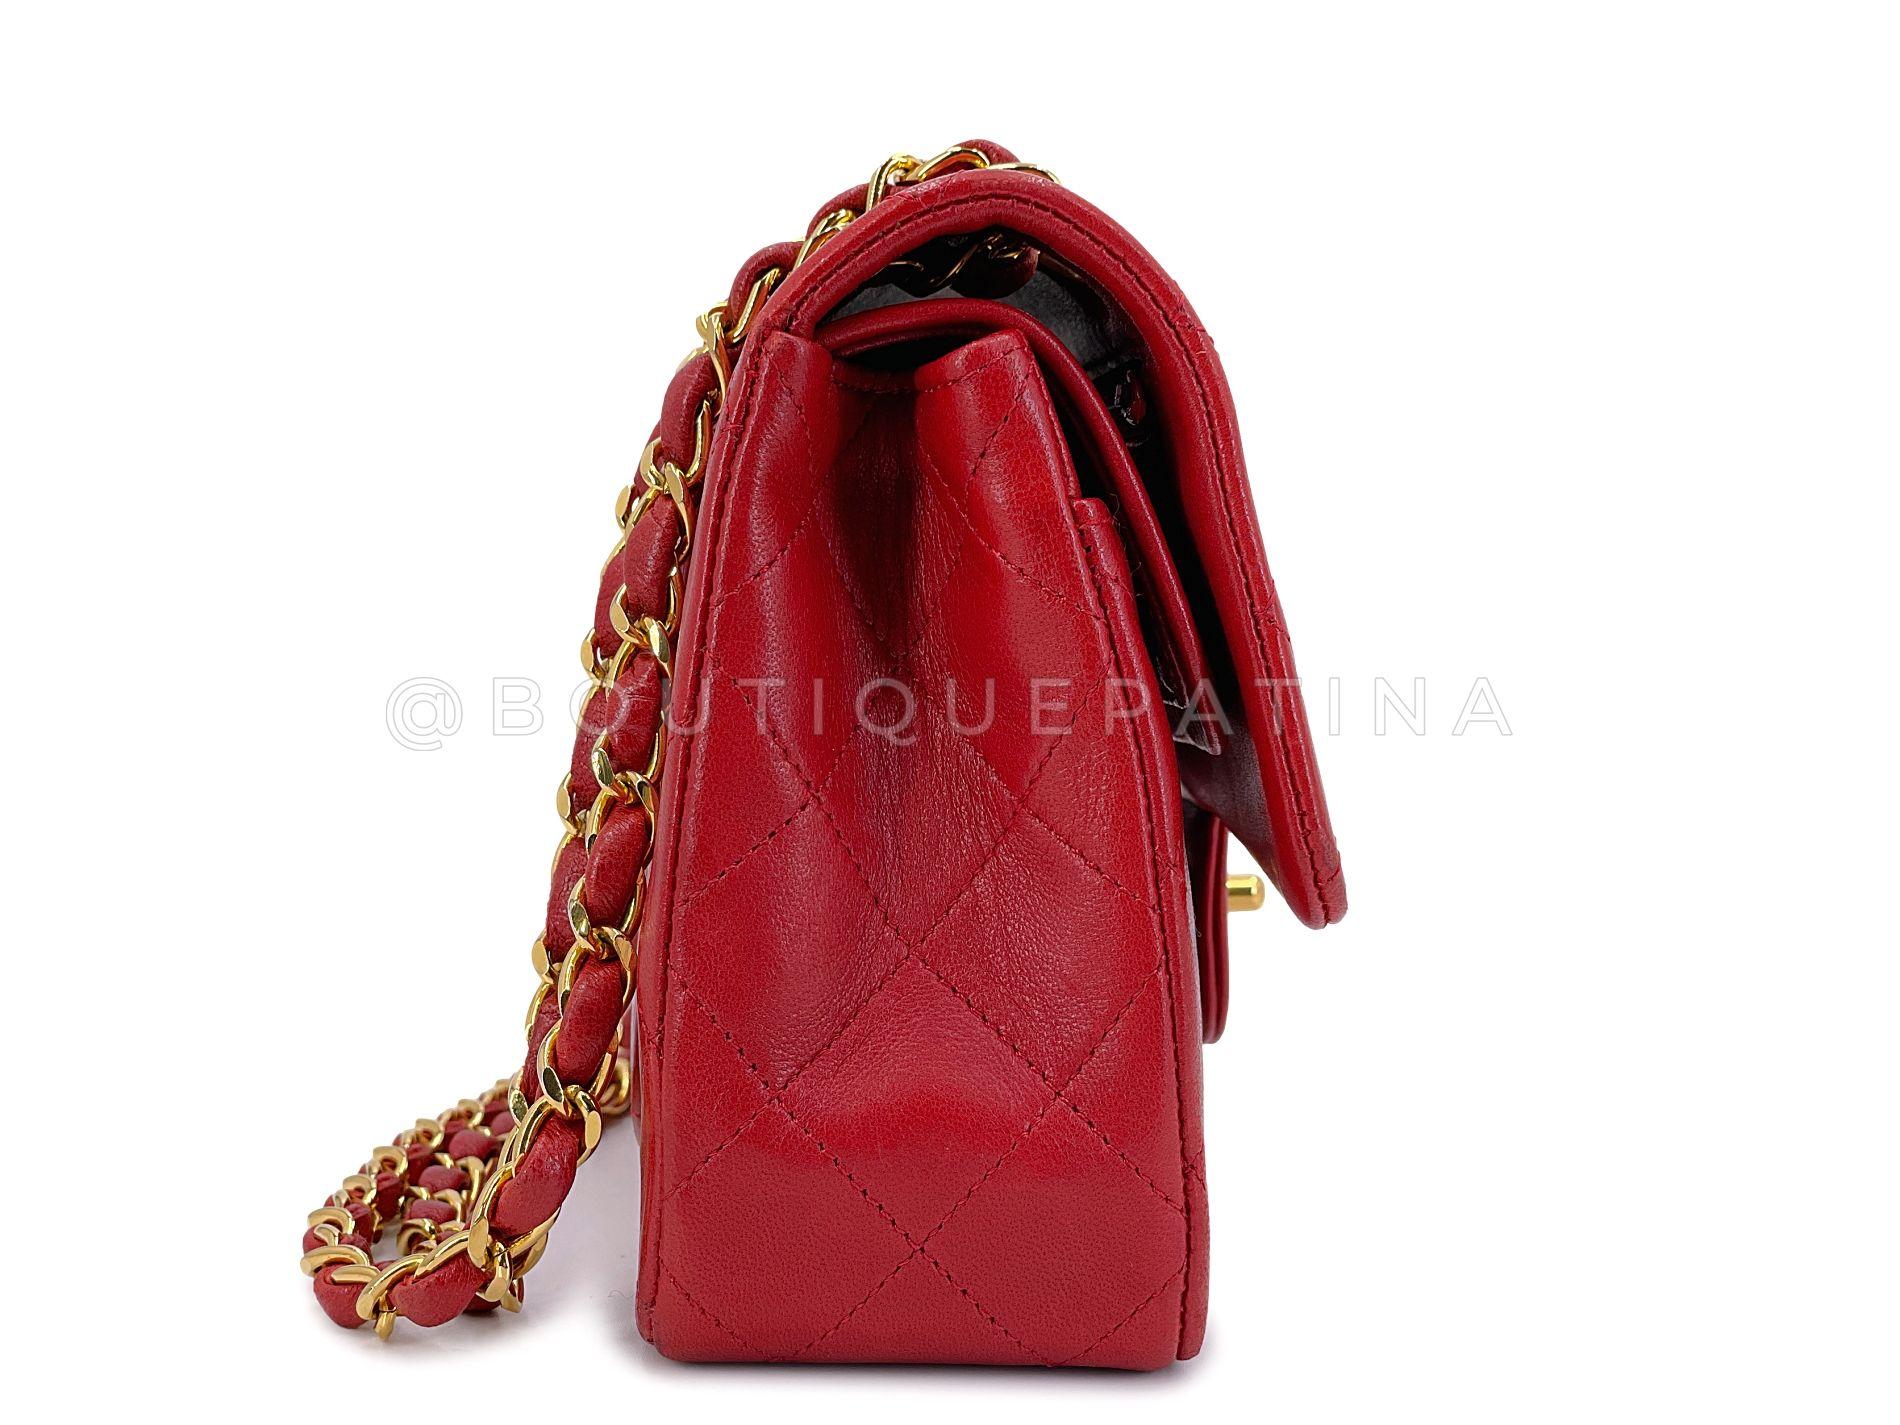 Chanel 1988 Vintage Red Small Classic Double Flap Bag 24k GHW Lambskin 68032 In Excellent Condition For Sale In Costa Mesa, CA